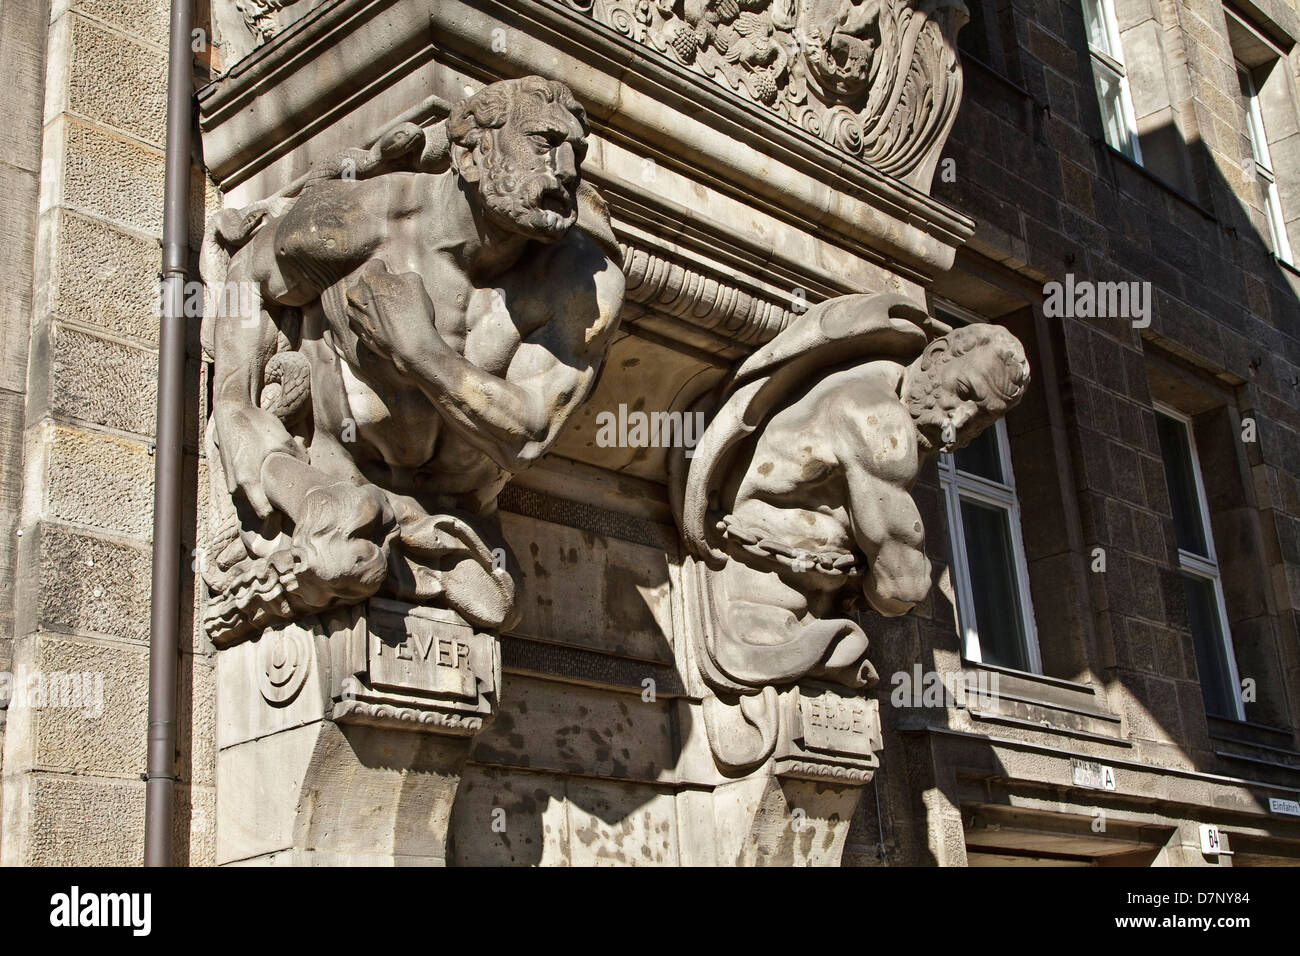 Two busts called Fever & Erde supporting an enclosed walkway between two buildings in Fransoschestraße, Berlin. Stock Photo